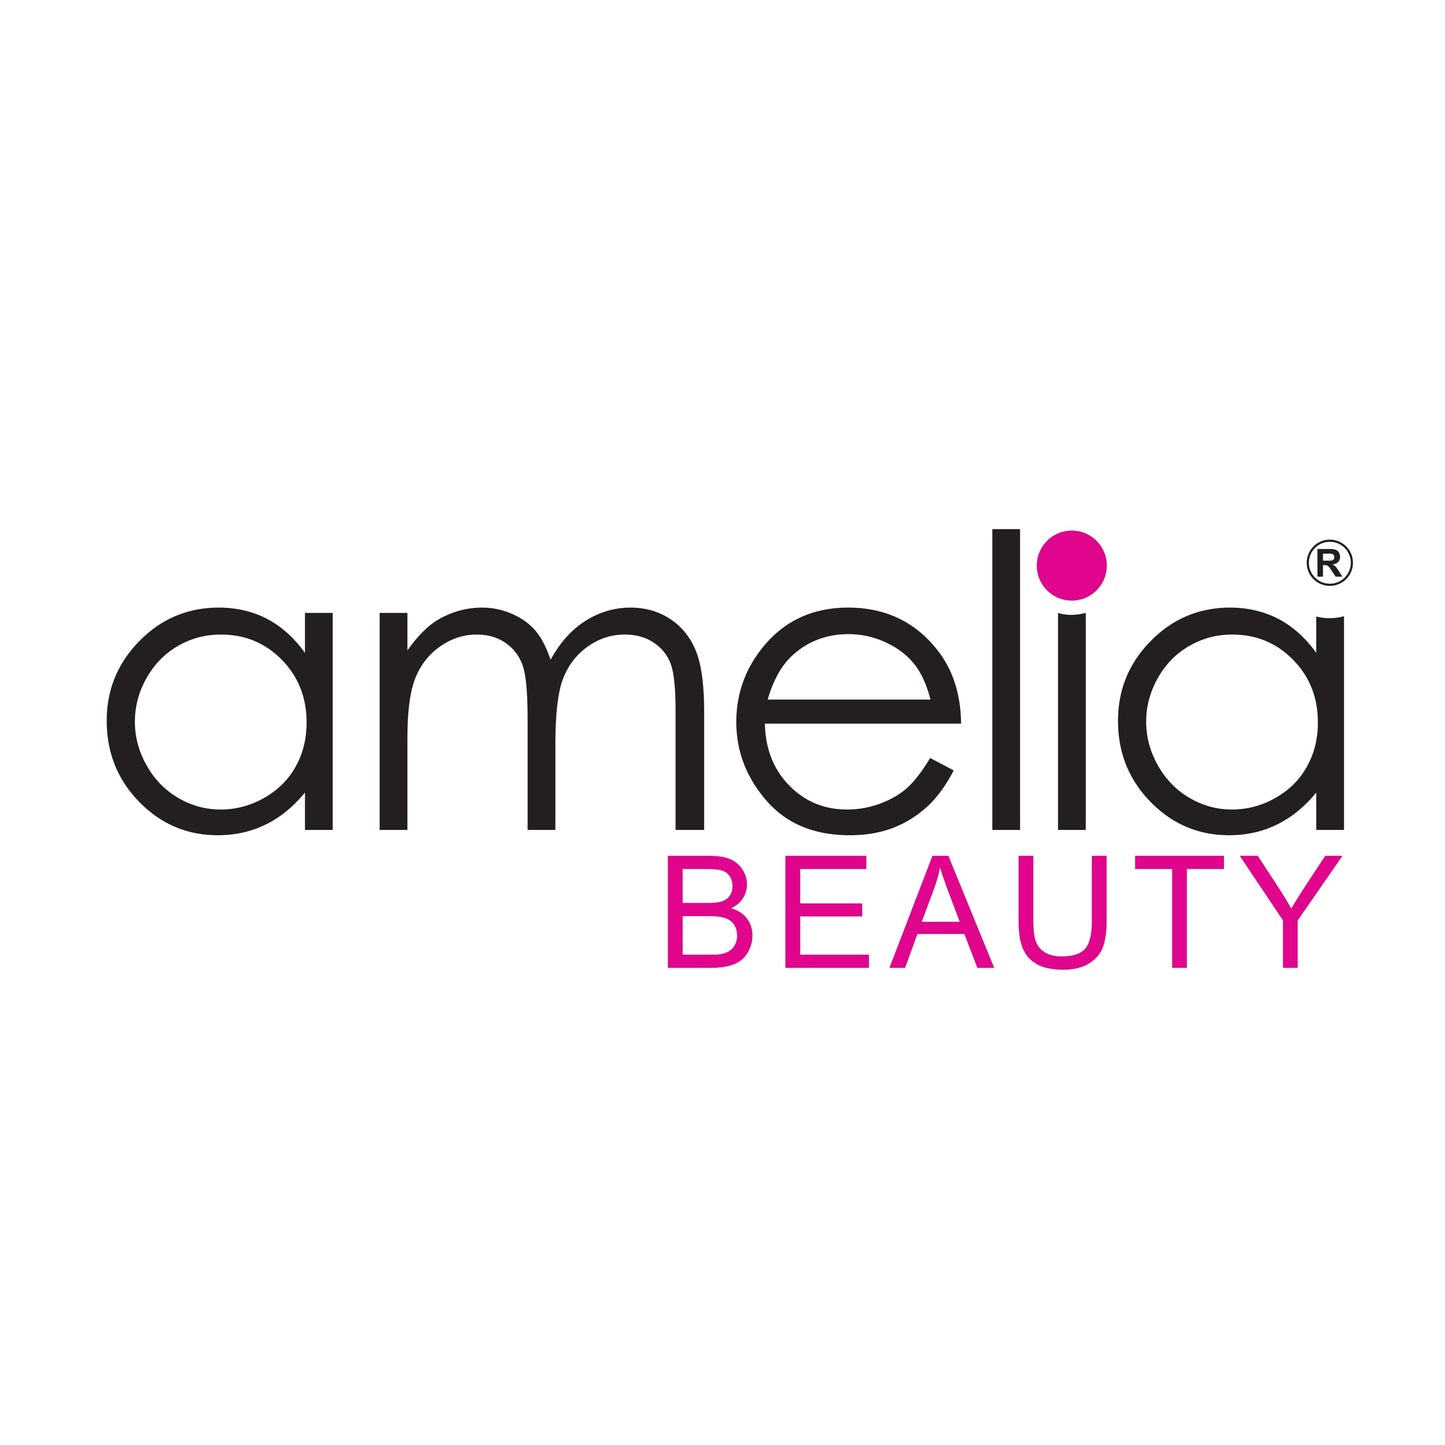 Amelia Beauty Products 8 Medium Smooth Elastic Mutli-Colored Hair Coils, 2.25in Diameter Spiral Hair Ties, Gentle Yet Strong Hold and Minimizes Dents, Yellow/Pink